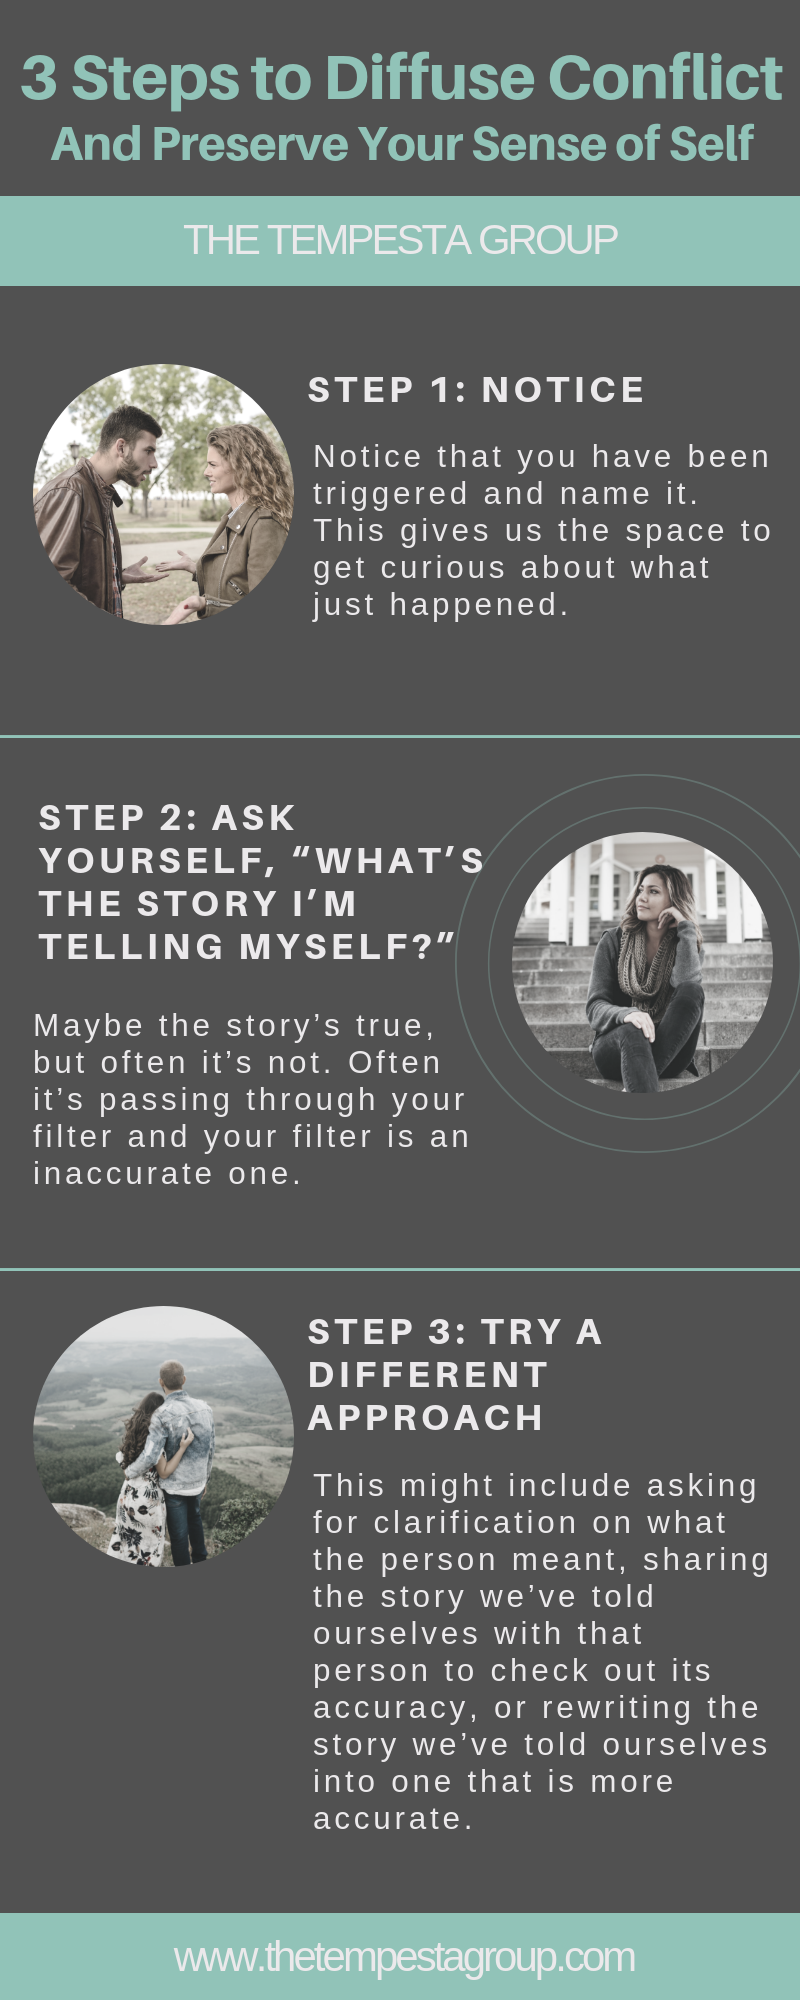 3 Steps to Diffuse Conflict Infographic